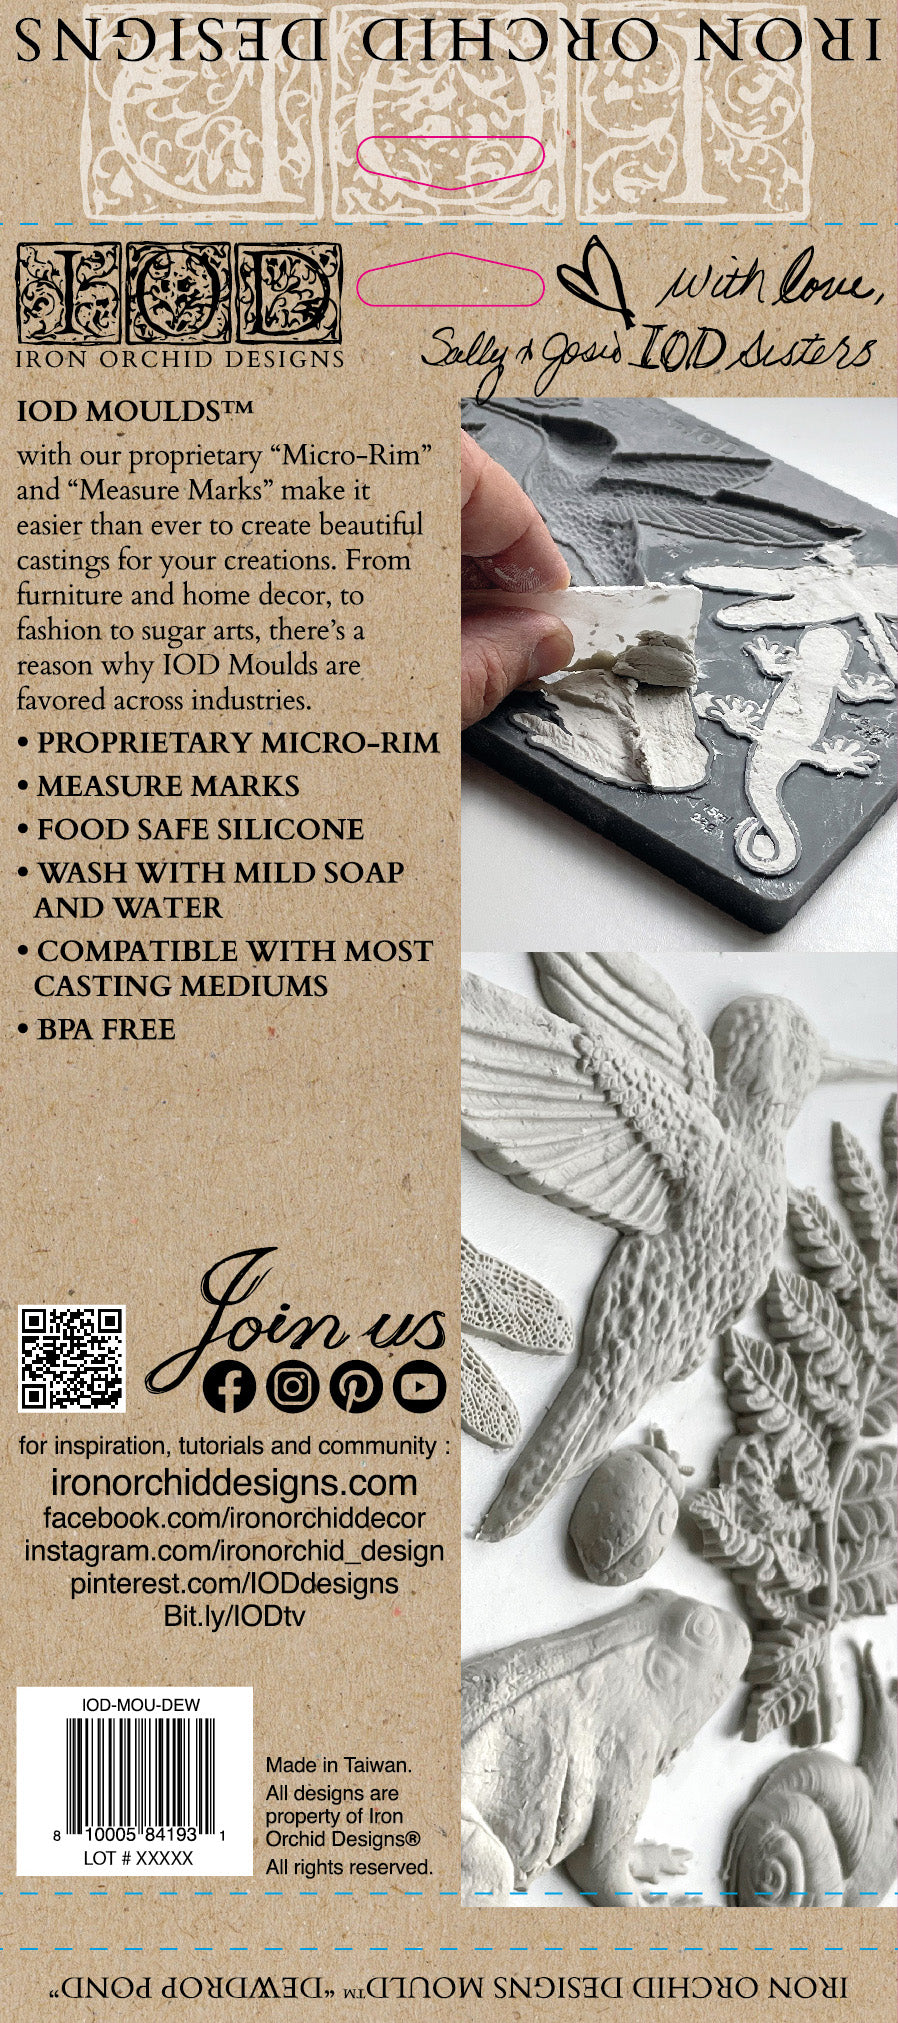 Our NEW Moulds are out! Have - IOD - Iron Orchid Designs